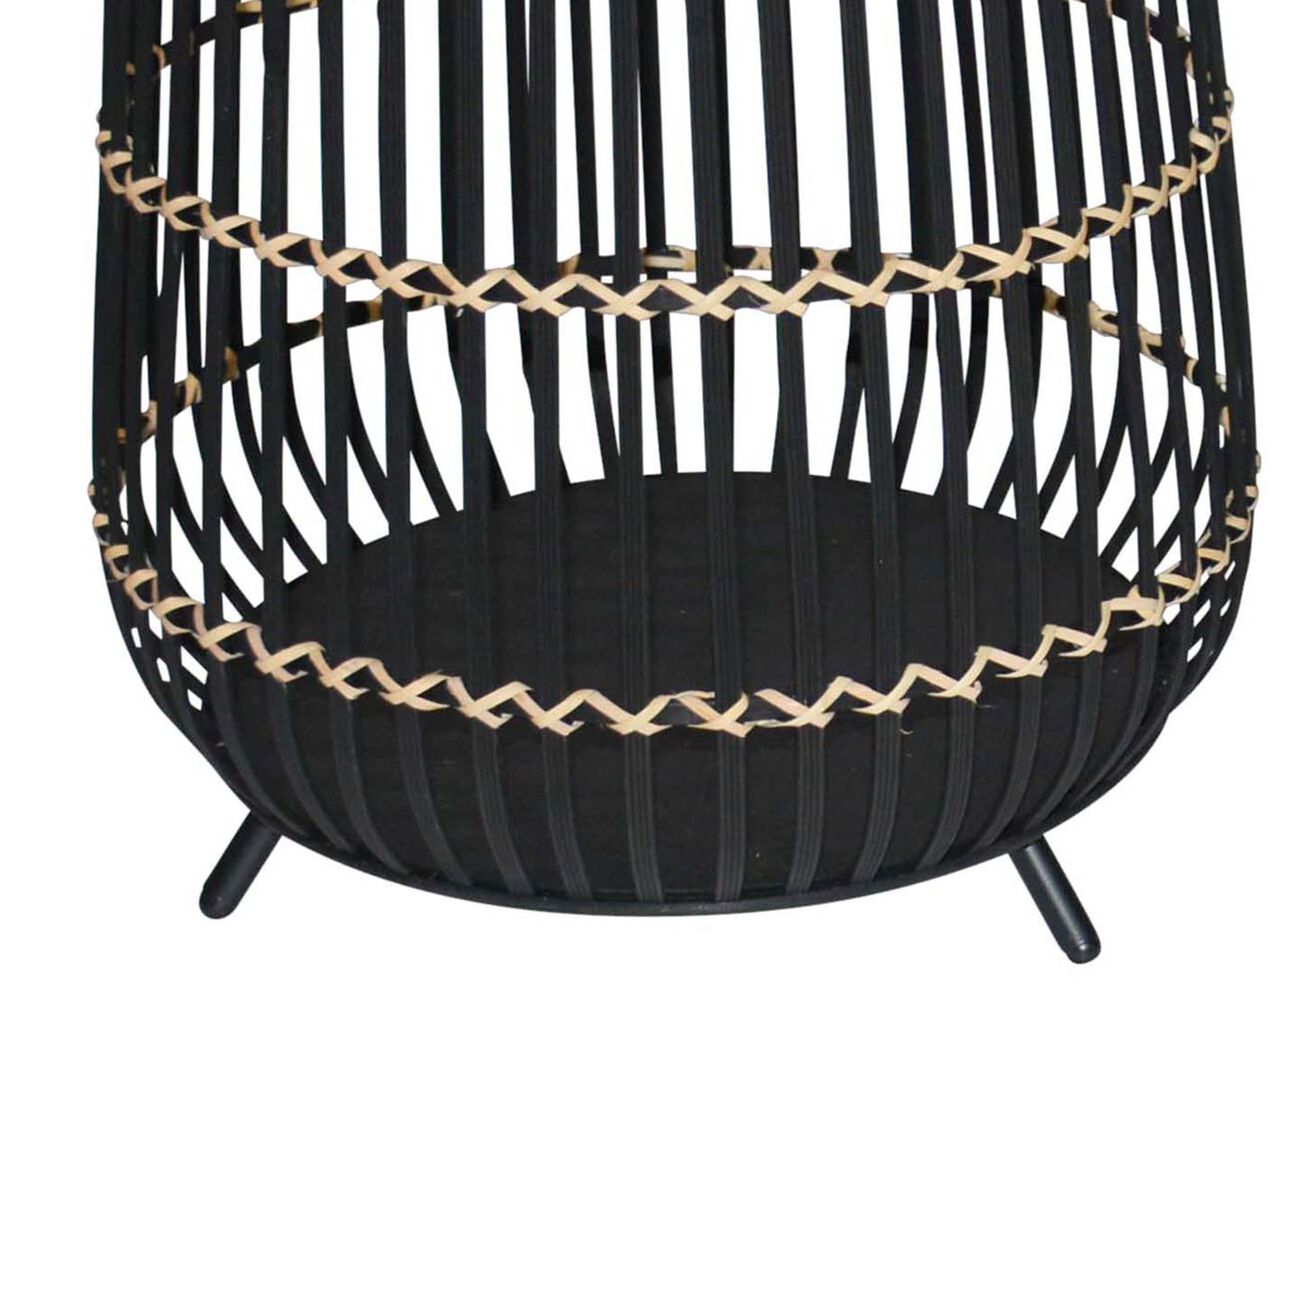 Drum Shaped Open Cage Bamboo Planter with Angled Legs, Set of 3, Black